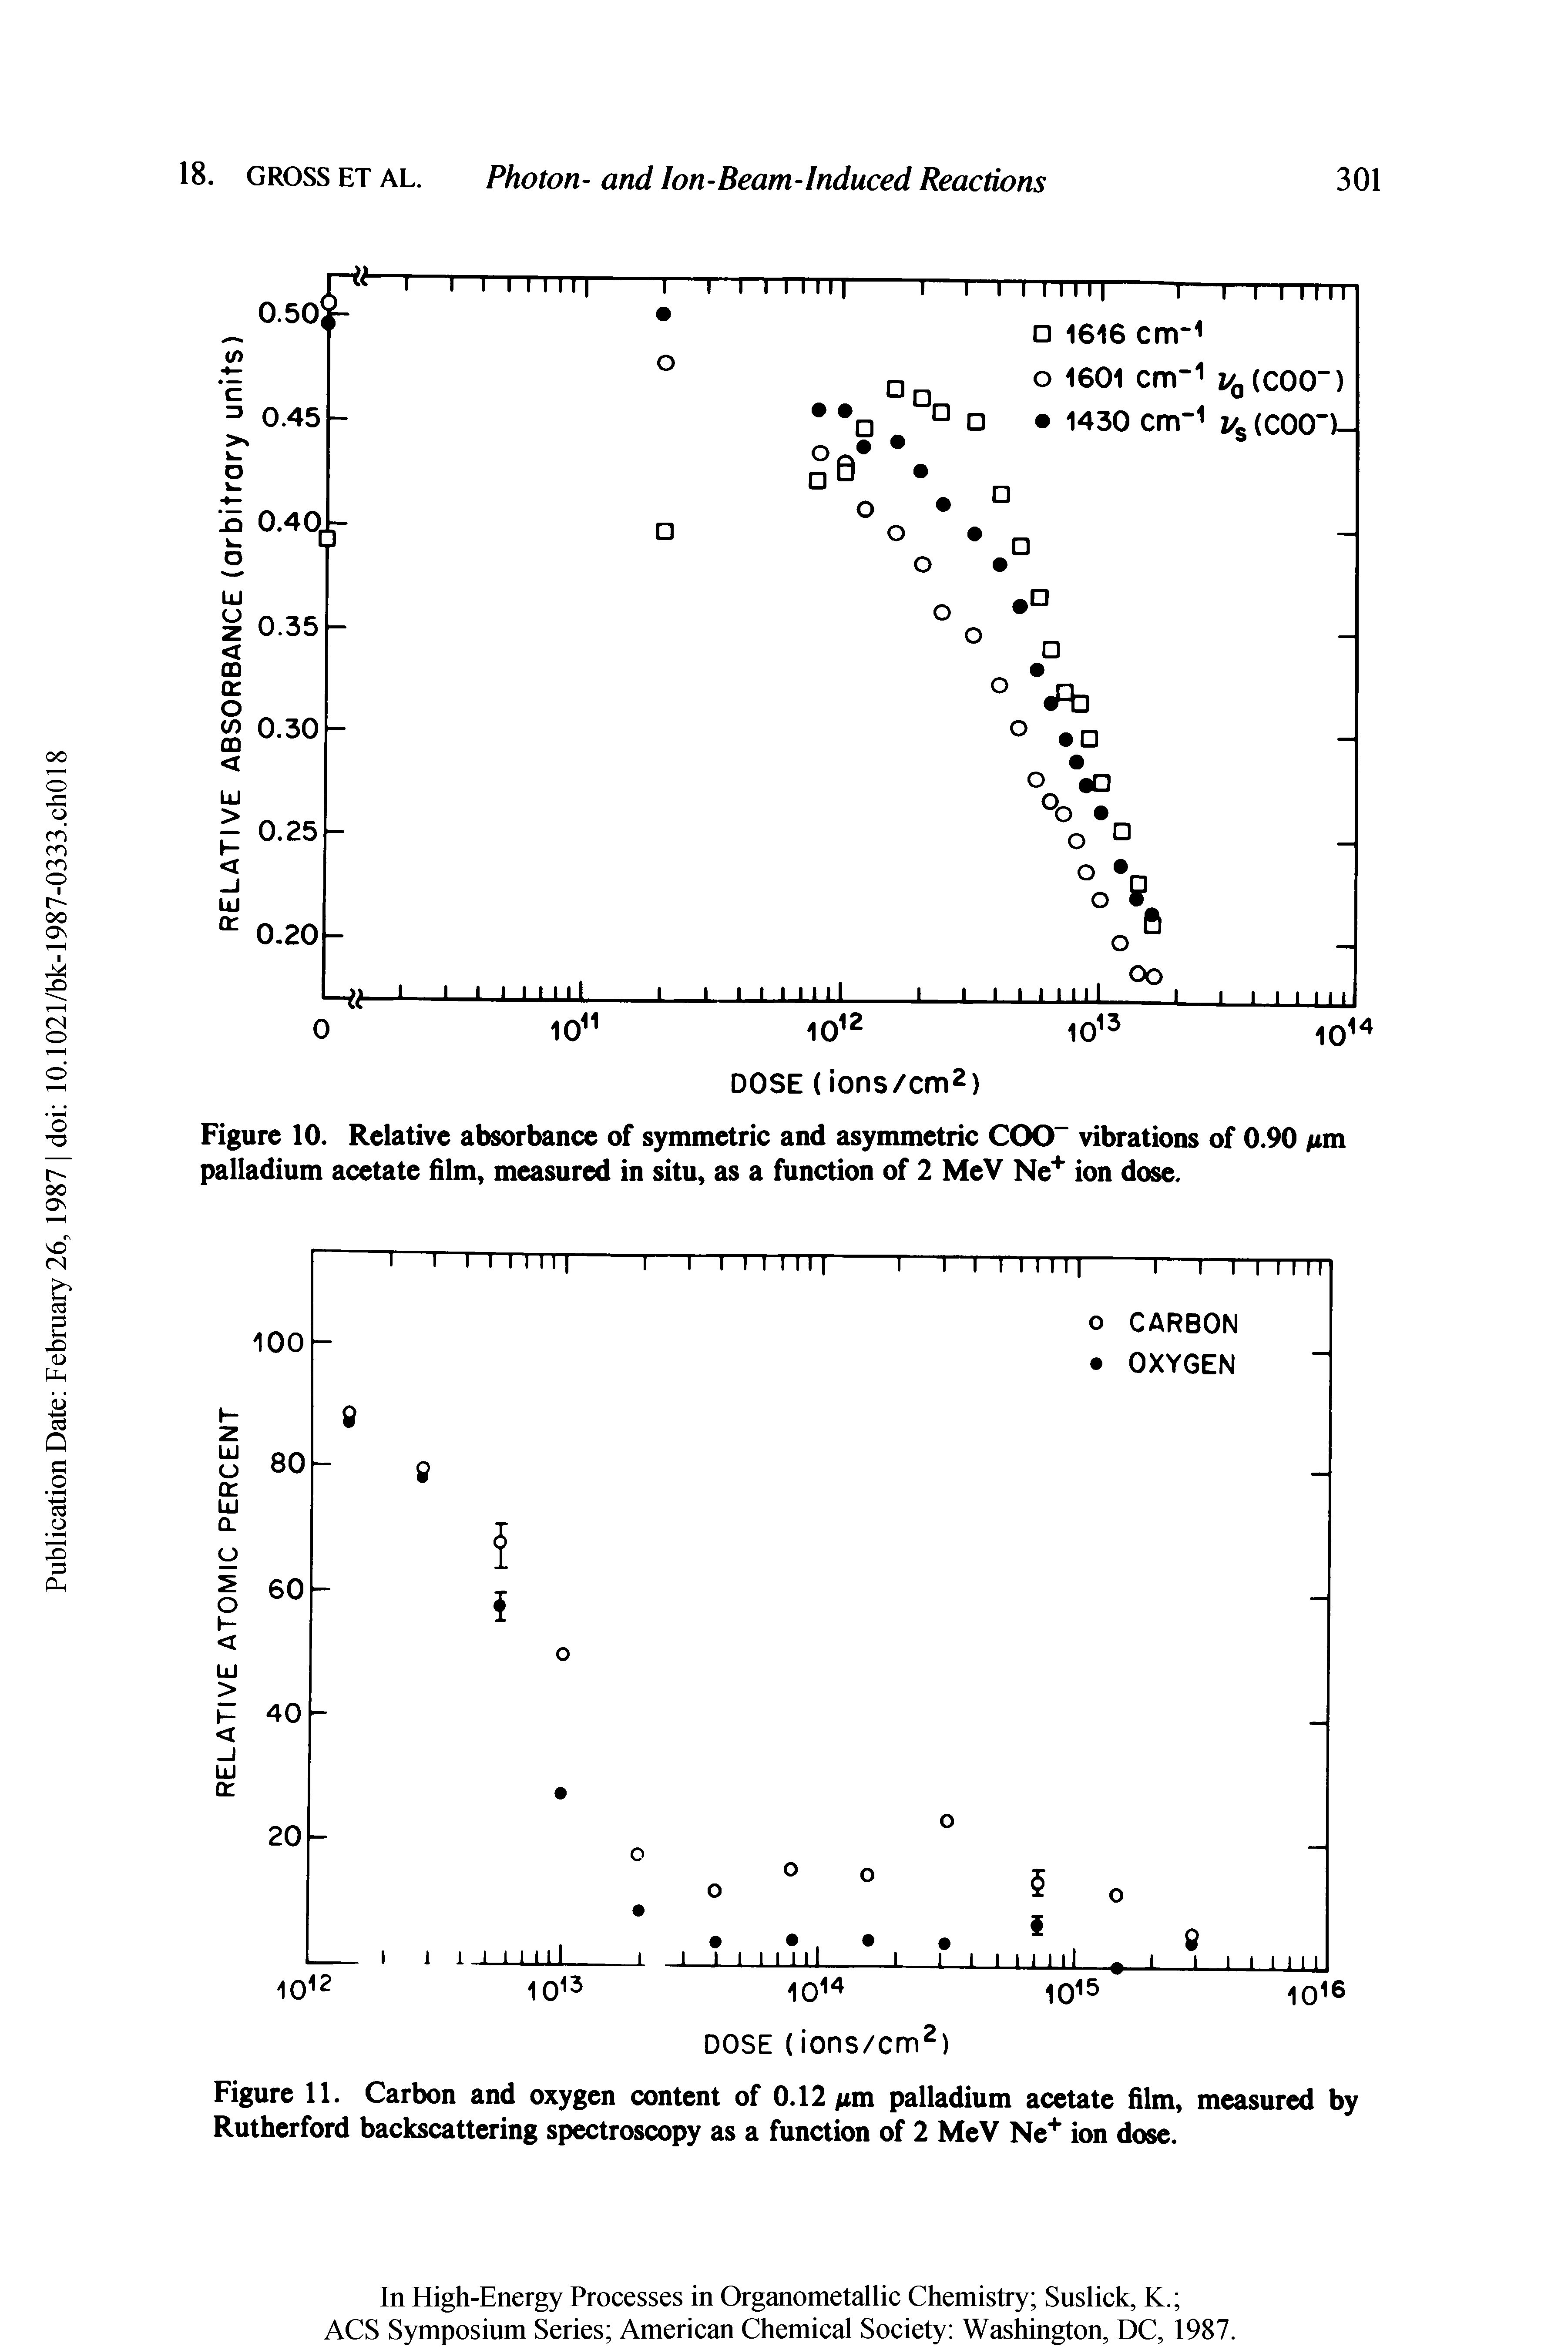 Figure 11. Carbon and oxygen content of 0.12/im palladium acetate film, measured by Rutherford backscattering spectroscopy as a function of 2 MeV Ne+ ion dose.